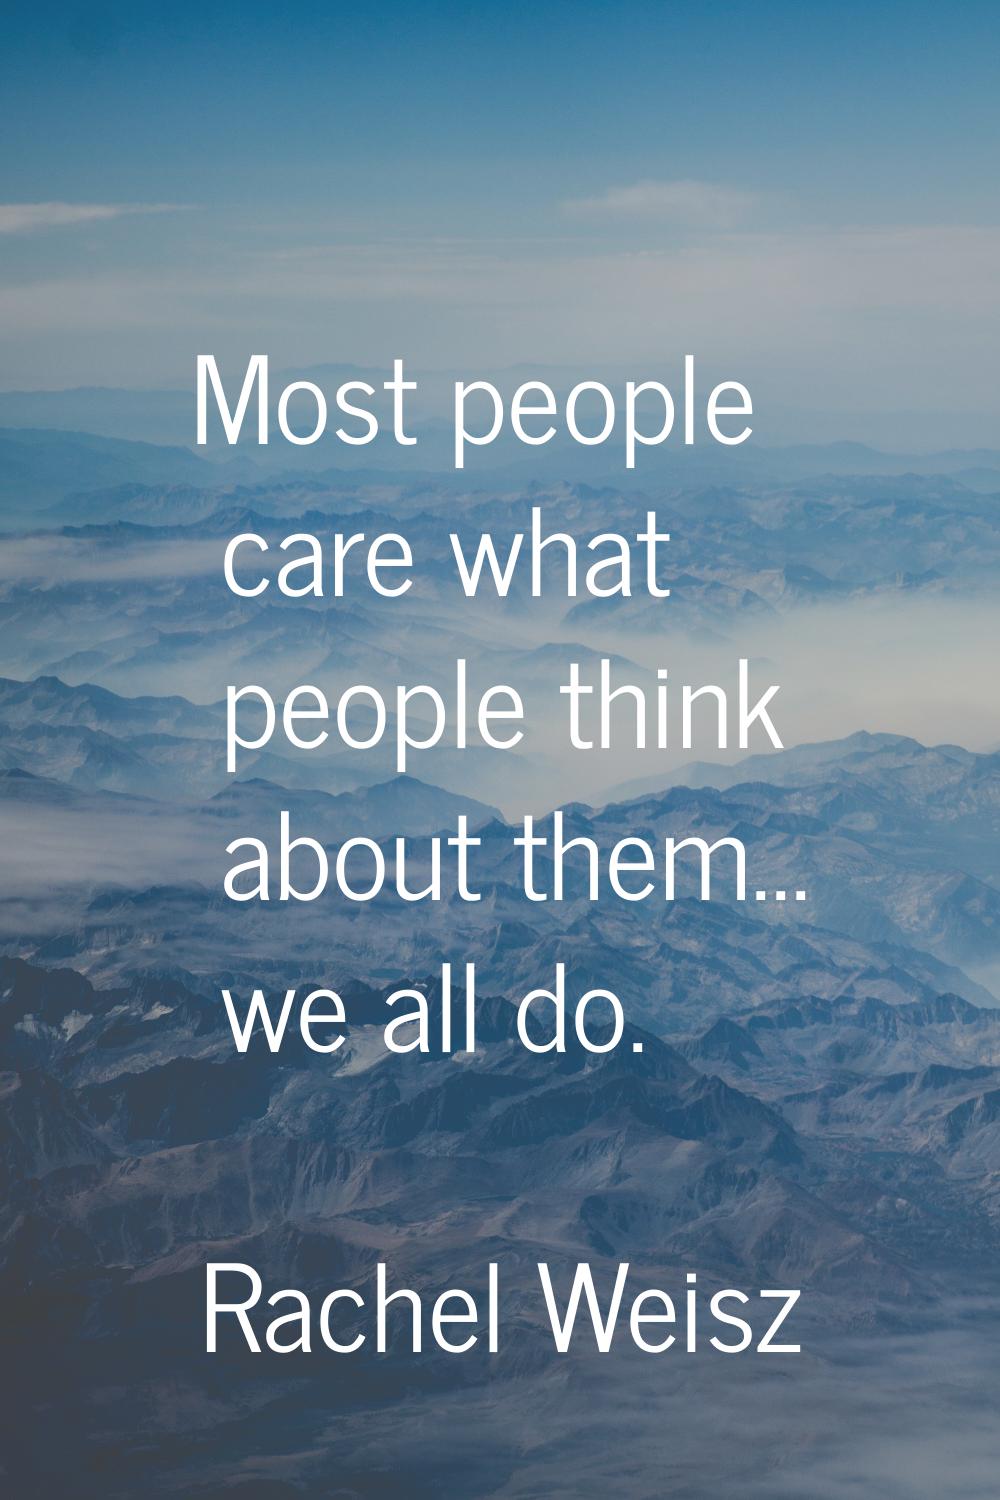 Most people care what people think about them... we all do.